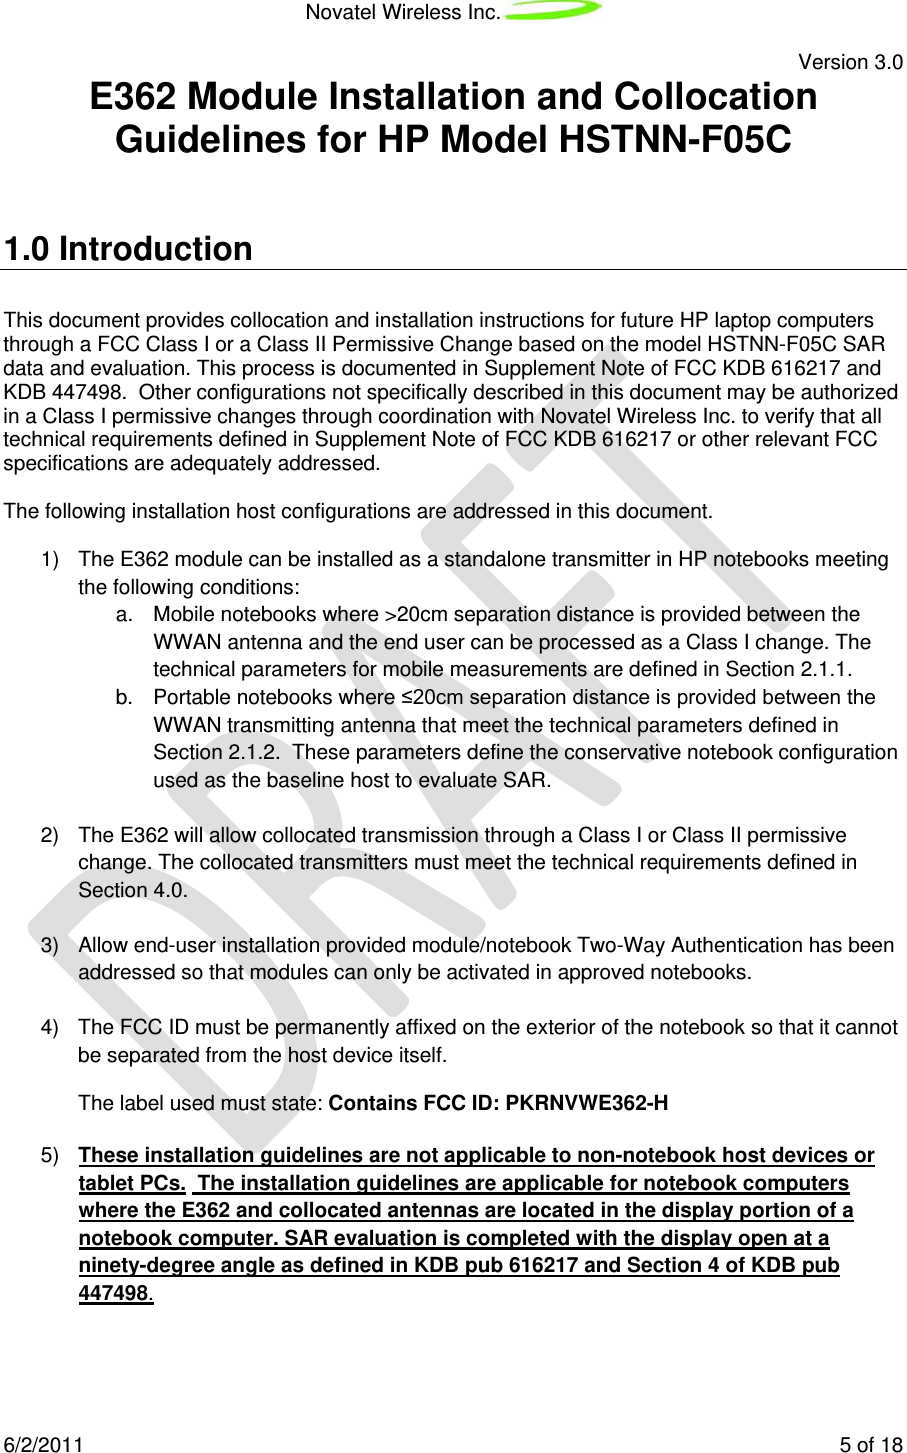 Novatel Wireless Inc.   Version 3.0 6/2/2011    5 of 18 E362 Module Installation and Collocation Guidelines for HP Model HSTNN-F05C  1.0 Introduction This document provides collocation and installation instructions for future HP laptop computers through a FCC Class I or a Class II Permissive Change based on the model HSTNN-F05C SAR data and evaluation. This process is documented in Supplement Note of FCC KDB 616217 and KDB 447498.  Other configurations not specifically described in this document may be authorized in a Class I permissive changes through coordination with Novatel Wireless Inc. to verify that all technical requirements defined in Supplement Note of FCC KDB 616217 or other relevant FCC specifications are adequately addressed.  The following installation host configurations are addressed in this document.   1) The E362 module can be installed as a standalone transmitter in HP notebooks meeting the following conditions: a. Mobile notebooks where &gt;20cm separation distance is provided between the WWAN antenna and the end user can be processed as a Class I change. The technical parameters for mobile measurements are defined in Section 2.1.1. b. Portable notebooks where ≤20cm separation distance is provided between the WWAN transmitting antenna that meet the technical parameters defined in Section 2.1.2.  These parameters define the conservative notebook configuration used as the baseline host to evaluate SAR.    2) The E362 will allow collocated transmission through a Class I or Class II permissive change. The collocated transmitters must meet the technical requirements defined in Section 4.0.   3) Allow end-user installation provided module/notebook Two-Way Authentication has been addressed so that modules can only be activated in approved notebooks.  4) The FCC ID must be permanently affixed on the exterior of the notebook so that it cannot be separated from the host device itself. The label used must state: Contains FCC ID: PKRNVWE362-H  5) These installation guidelines are not applicable to non-notebook host devices or tablet PCs.  The installation guidelines are applicable for notebook computers where the E362 and collocated antennas are located in the display portion of a notebook computer. SAR evaluation is completed with the display open at a ninety-degree angle as defined in KDB pub 616217 and Section 4 of KDB pub 447498. 